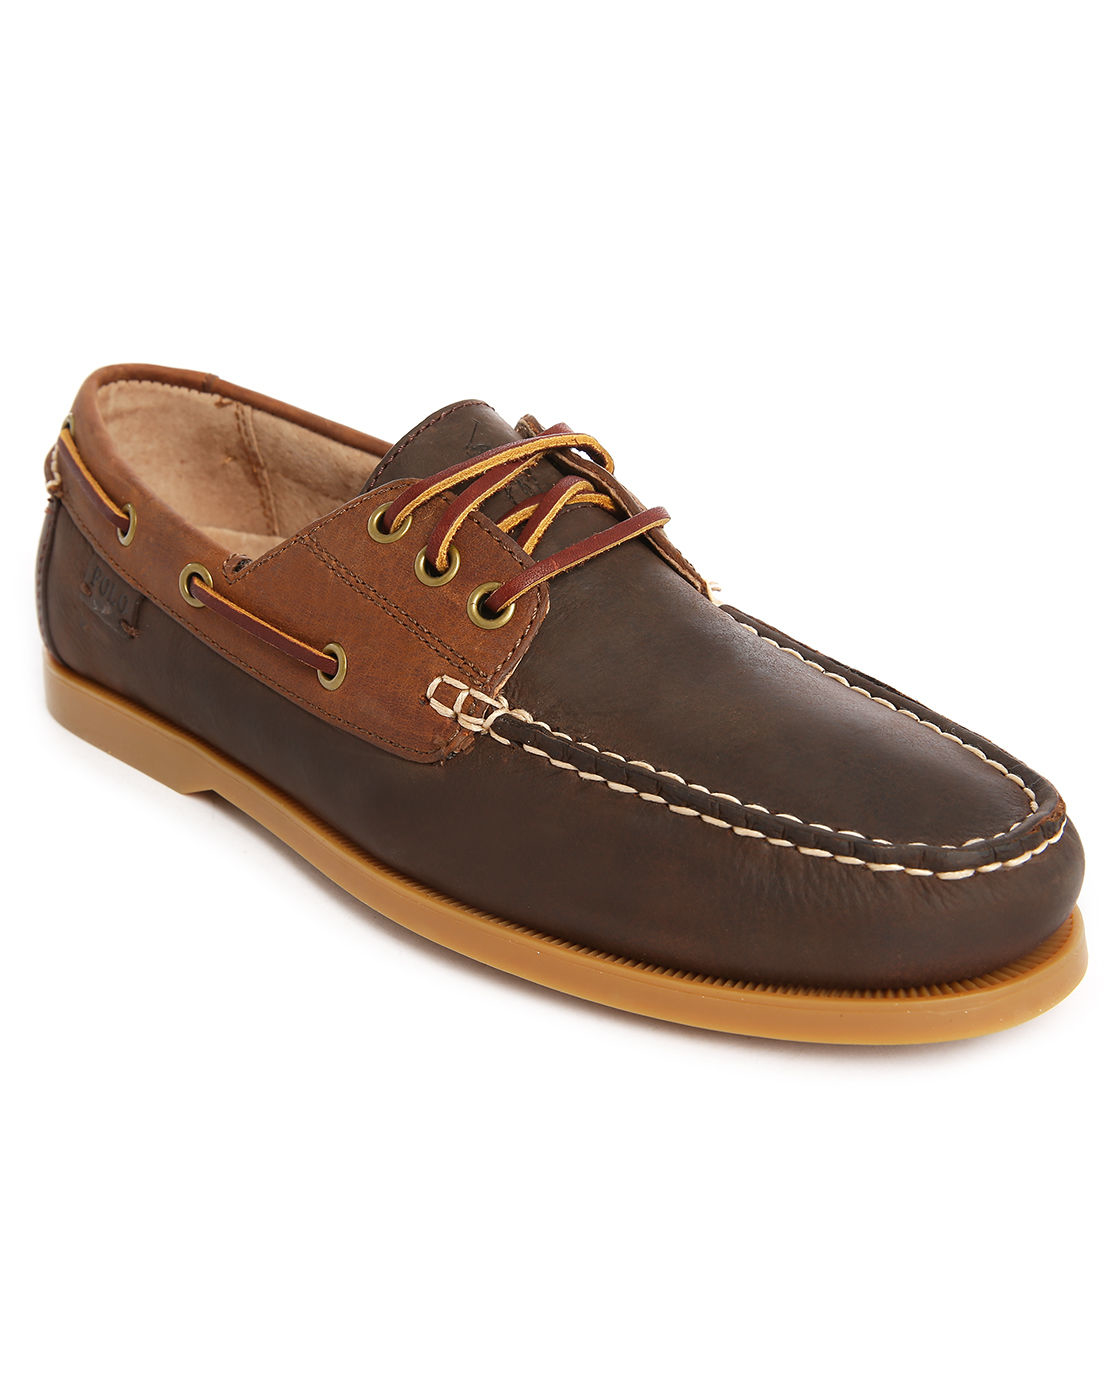 Polo ralph lauren Brown Leather Boat Shoes in Brown for